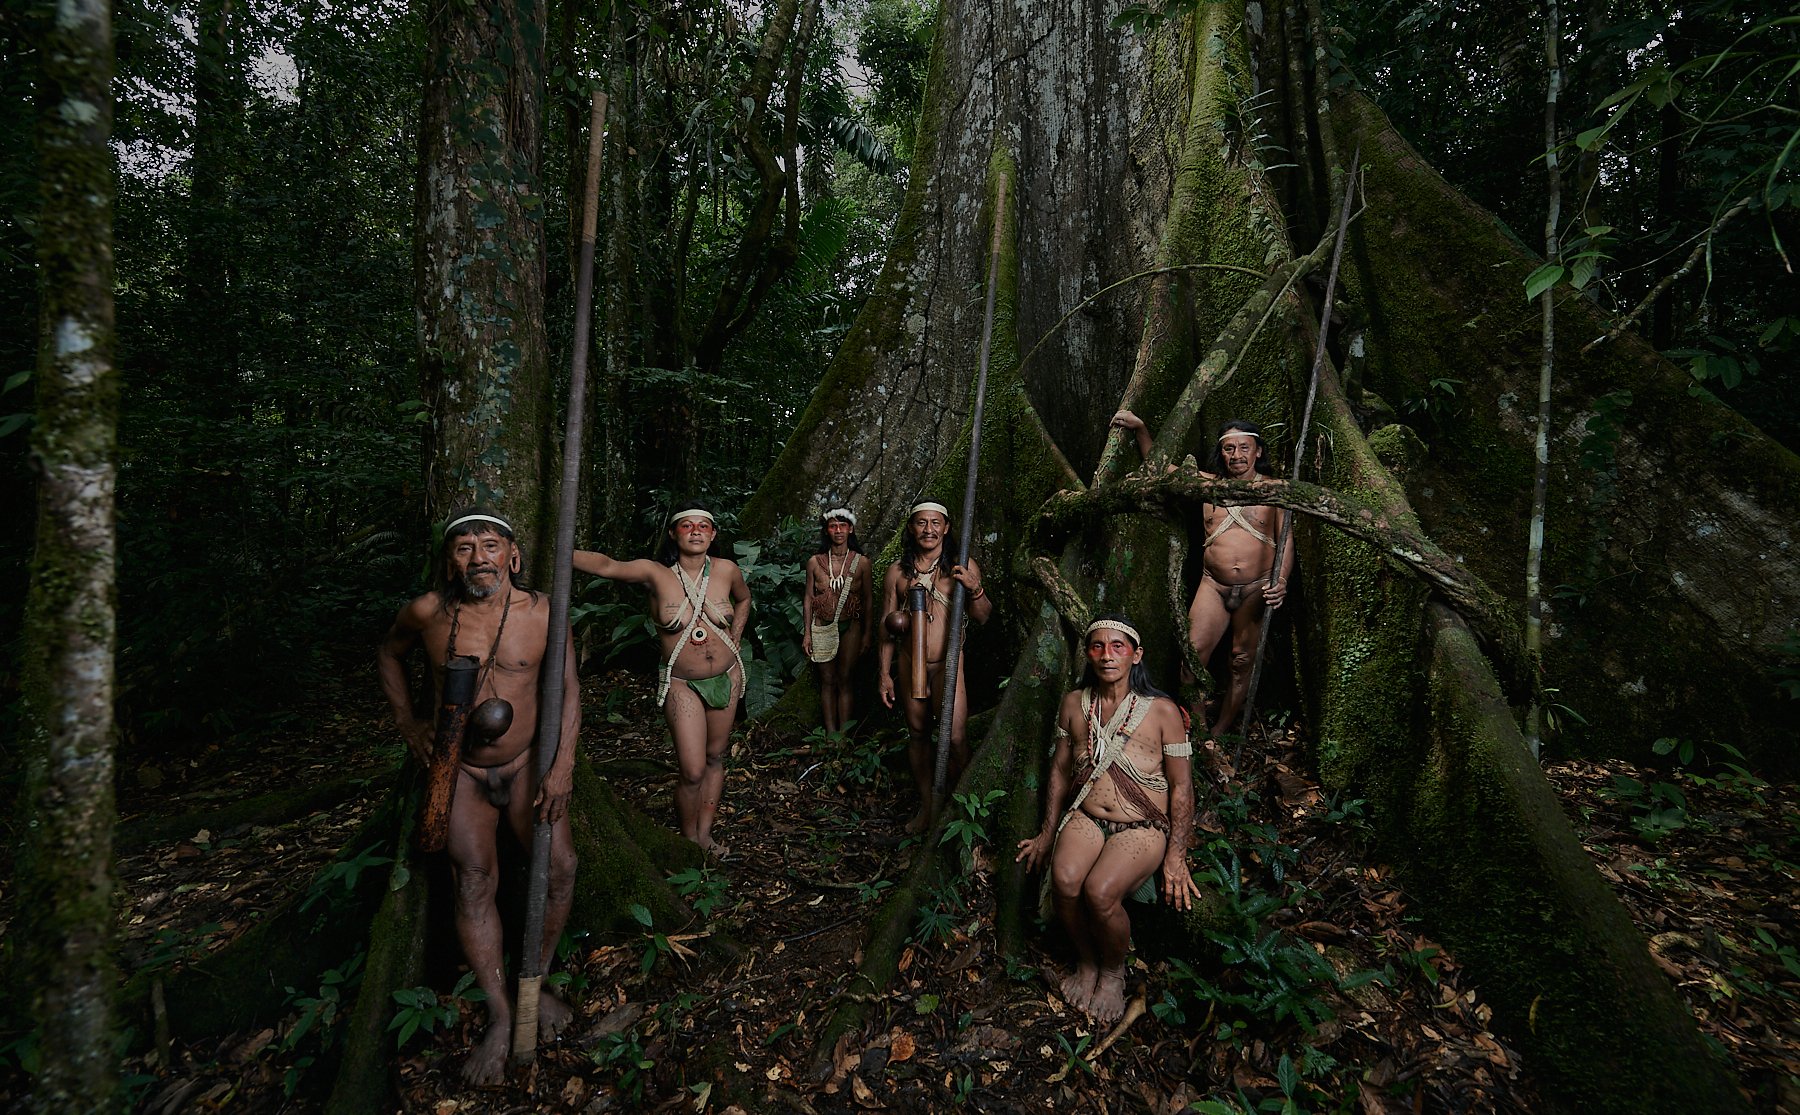 Warriors and women of the Huaorani tribe next to one of the giant trees in the jungle